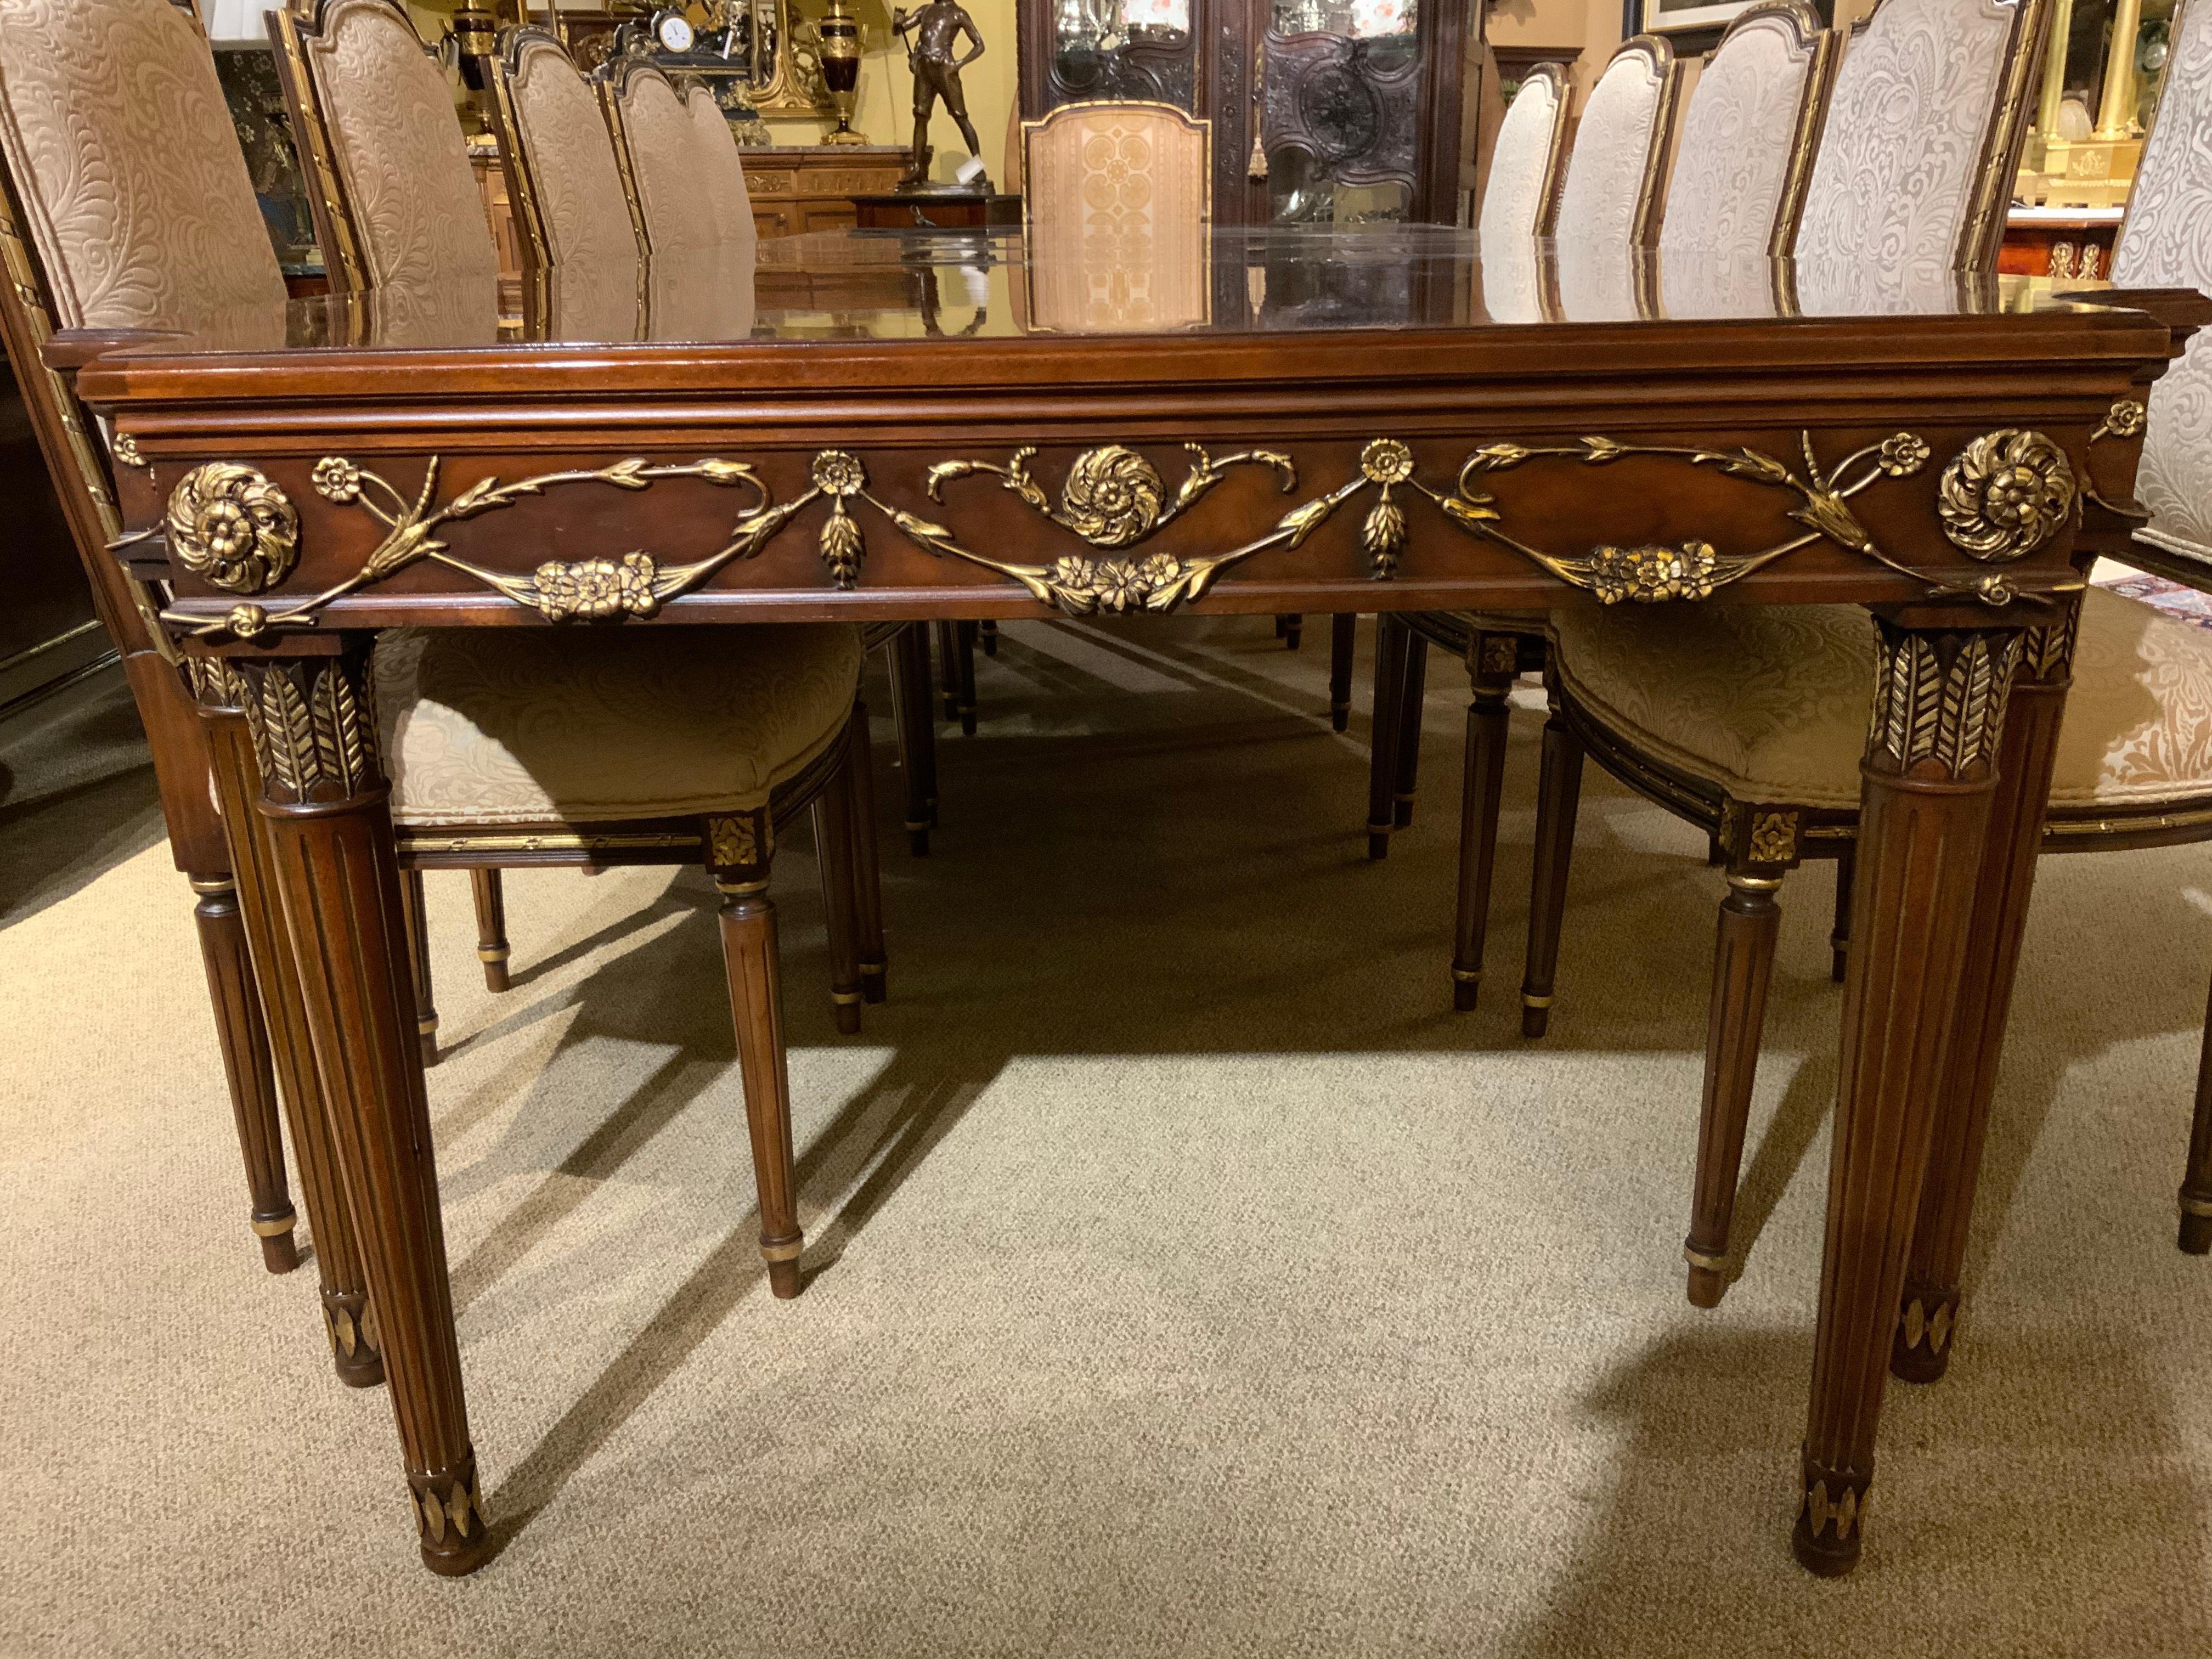 Louis XVI-Style Mahogany Dining Table with 12 Chairs, Marquetry Inlay Gilt Trim 1